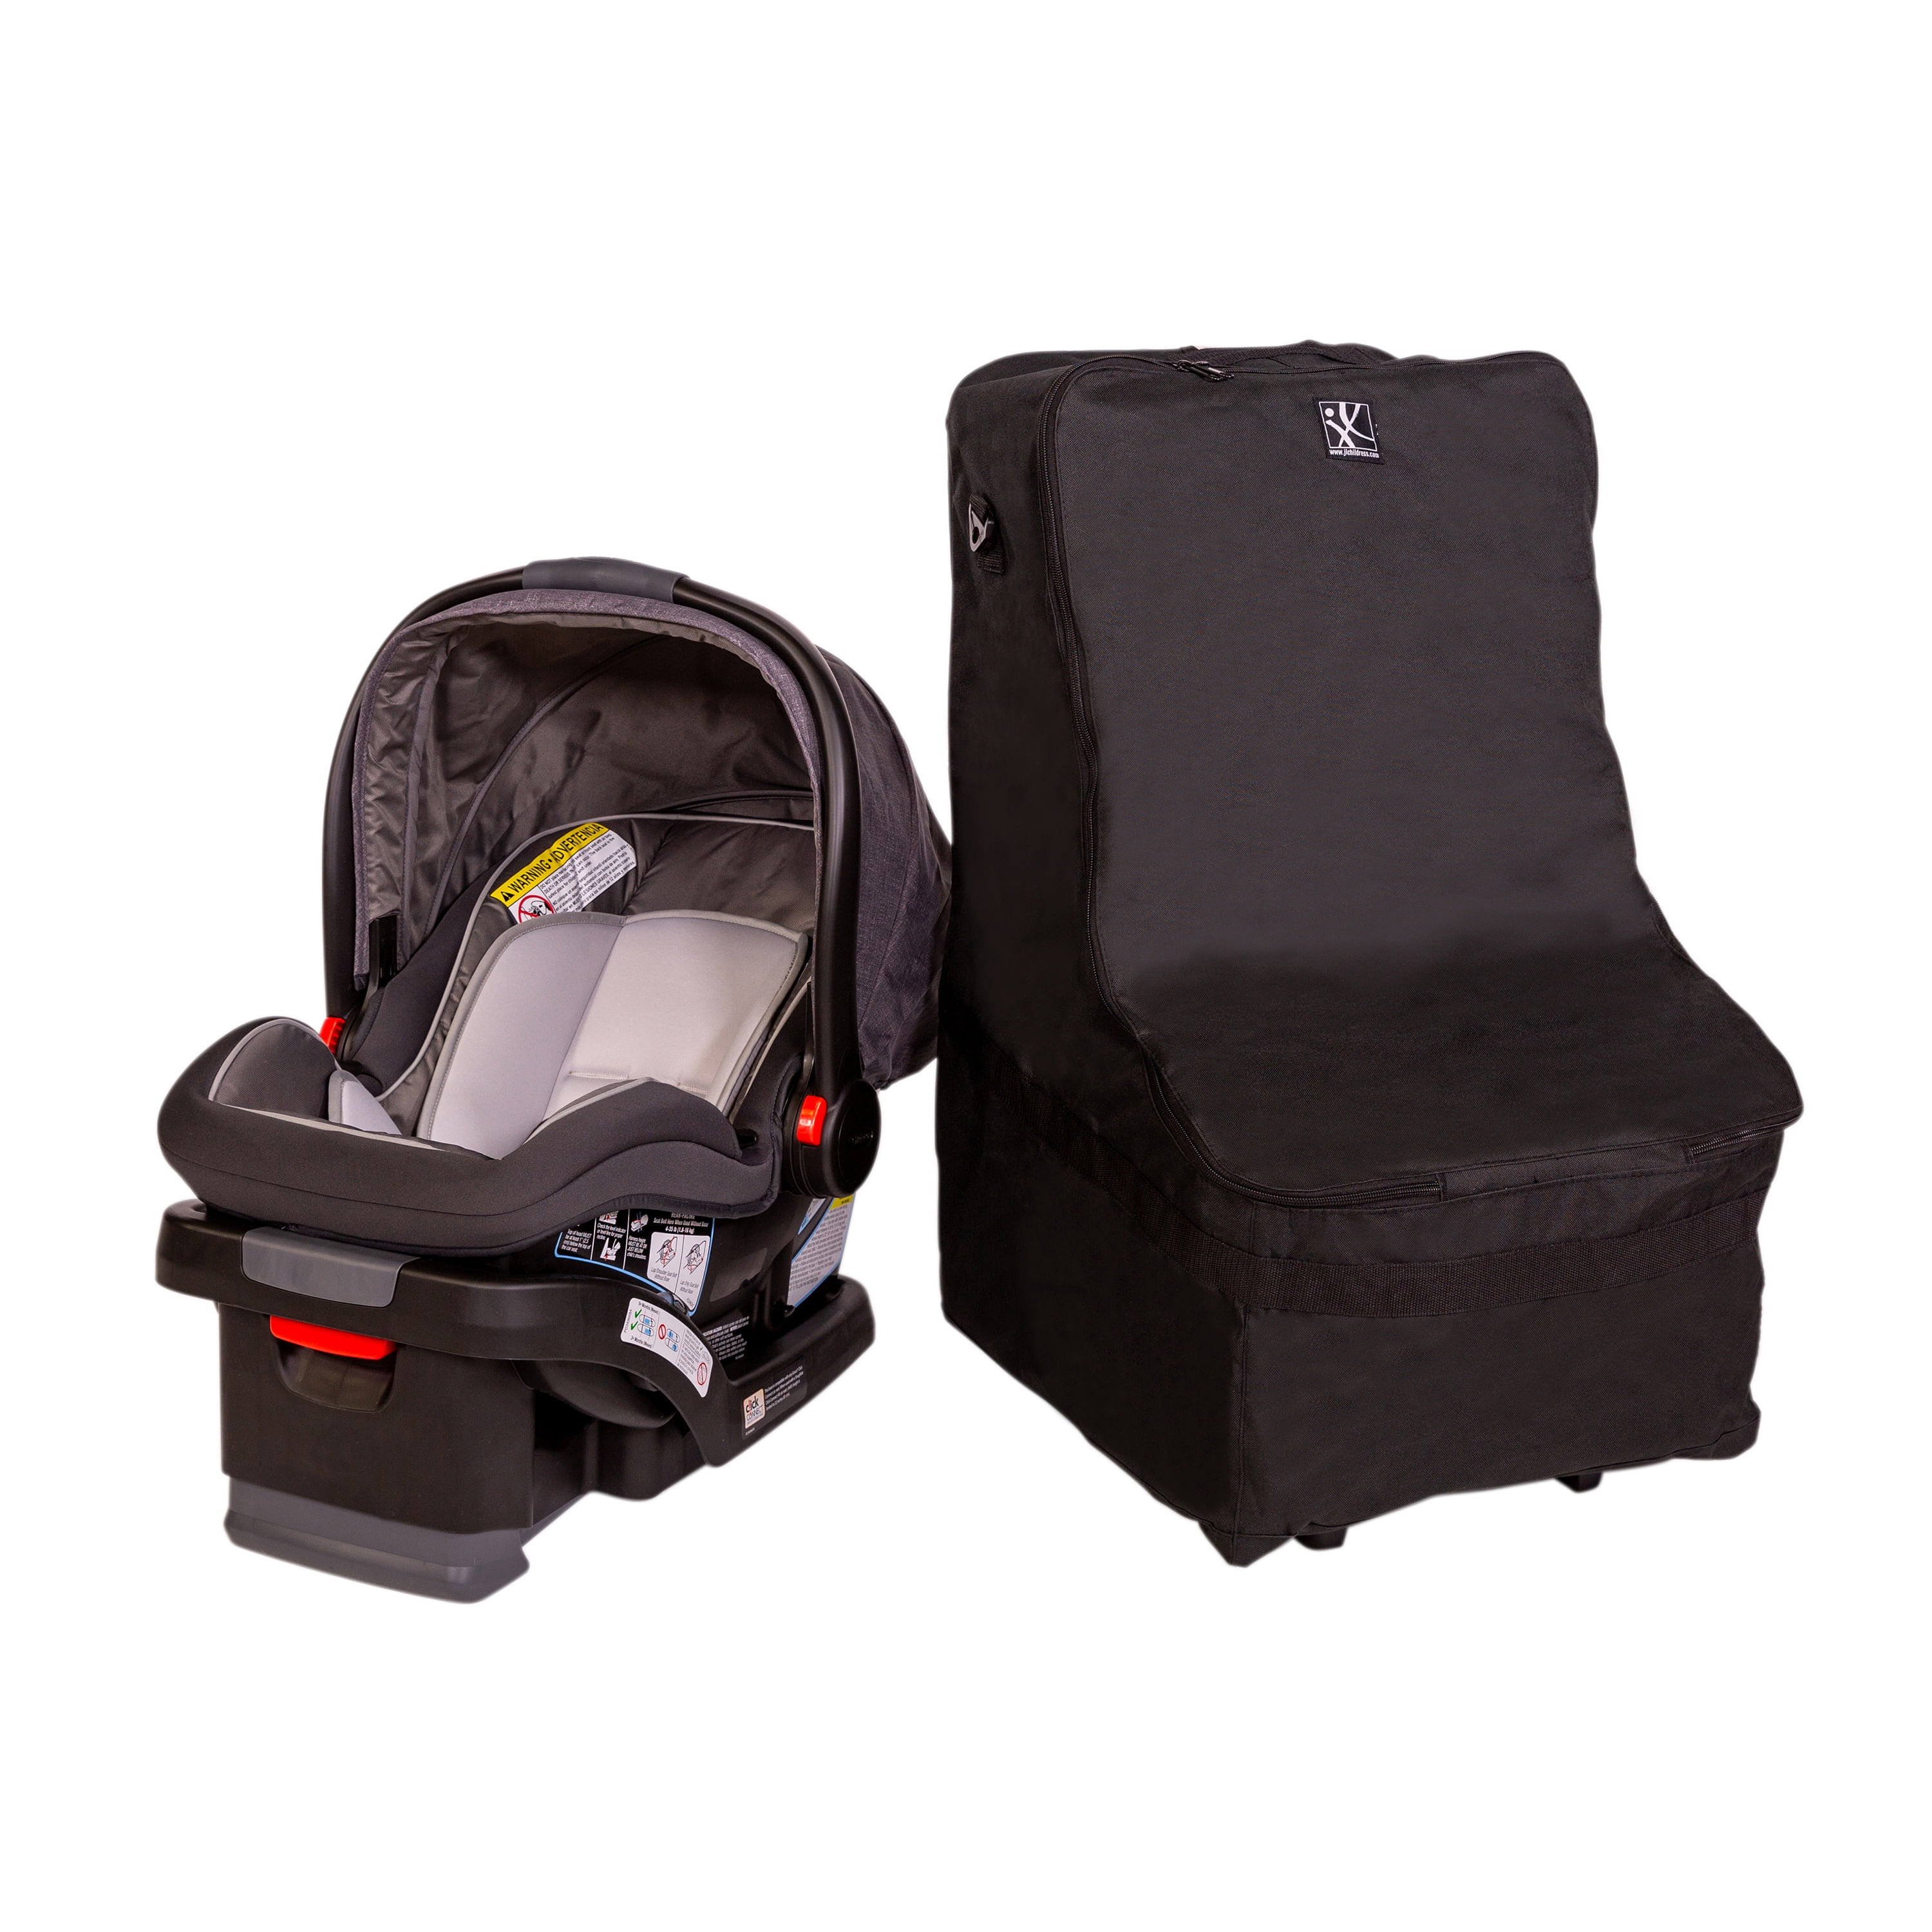 Quickway Imports Car Seat Storage Bag for Travel with Wheels, Black